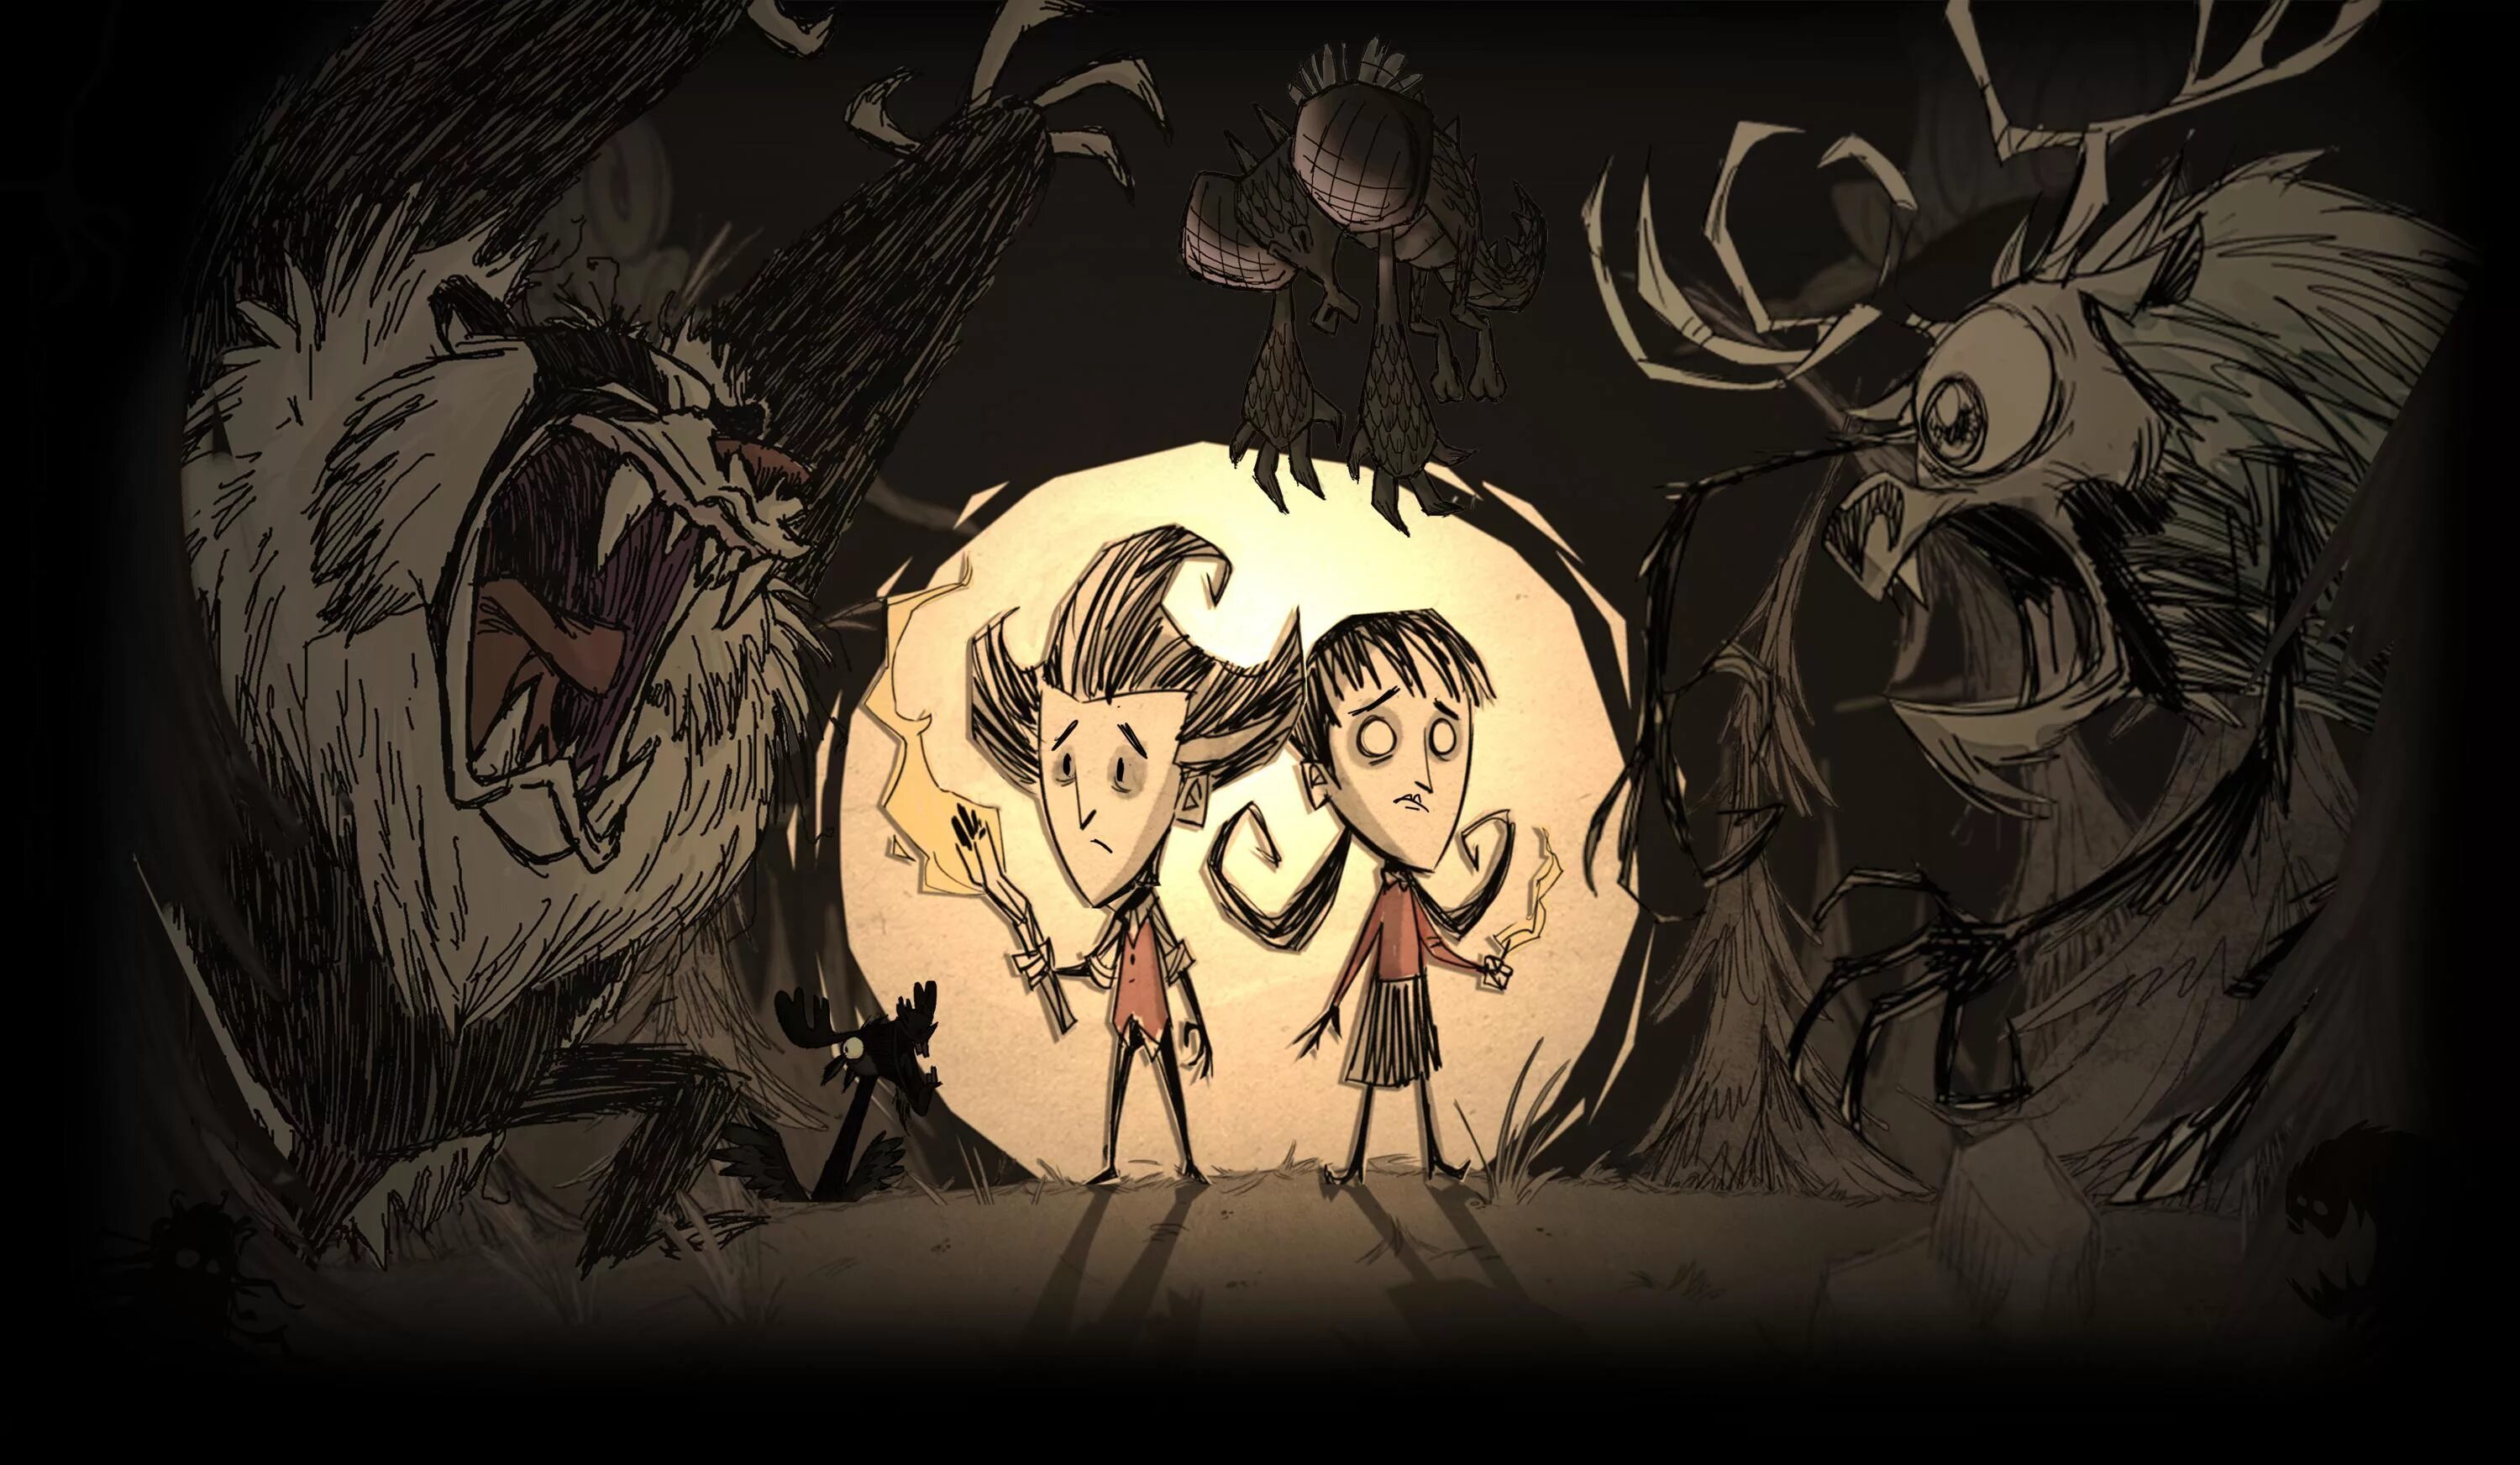 Don t starve starving games. Don't Starve together. Don't Starve together Близнецы. Вольфганг донт старв. Оборотни Вуди don't Starve.